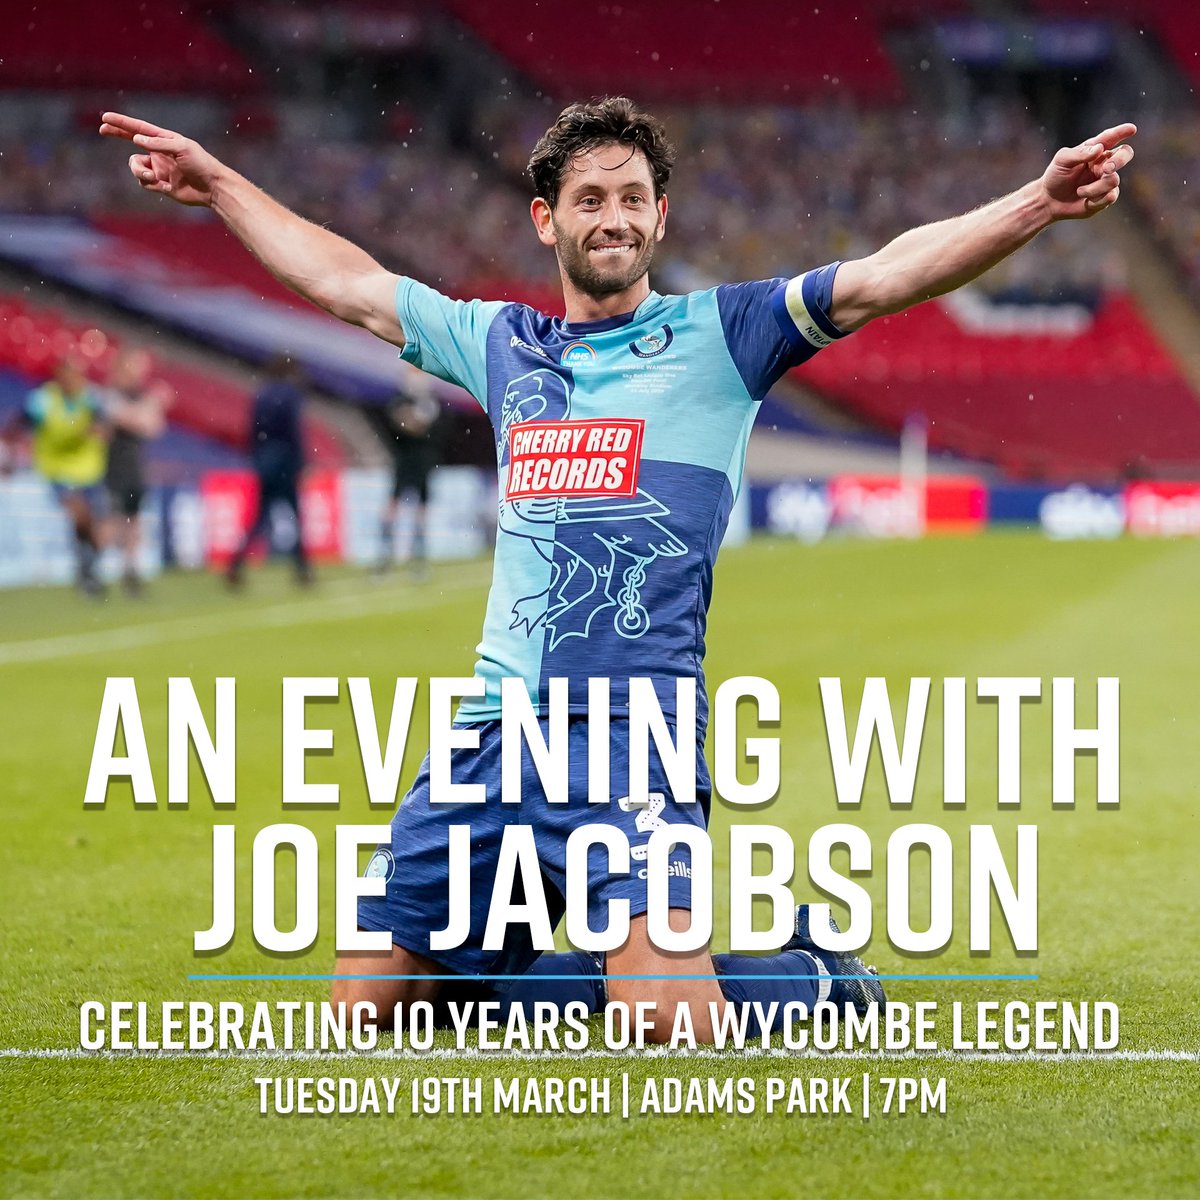 🗓️ A date for your diaries! An Evening with @joe_jacobson at Adams Park on Tuesday 19th March, celebrating 10 years of a Wycombe Wanderers legend. Featuring special guests! Ticket details to come this week.